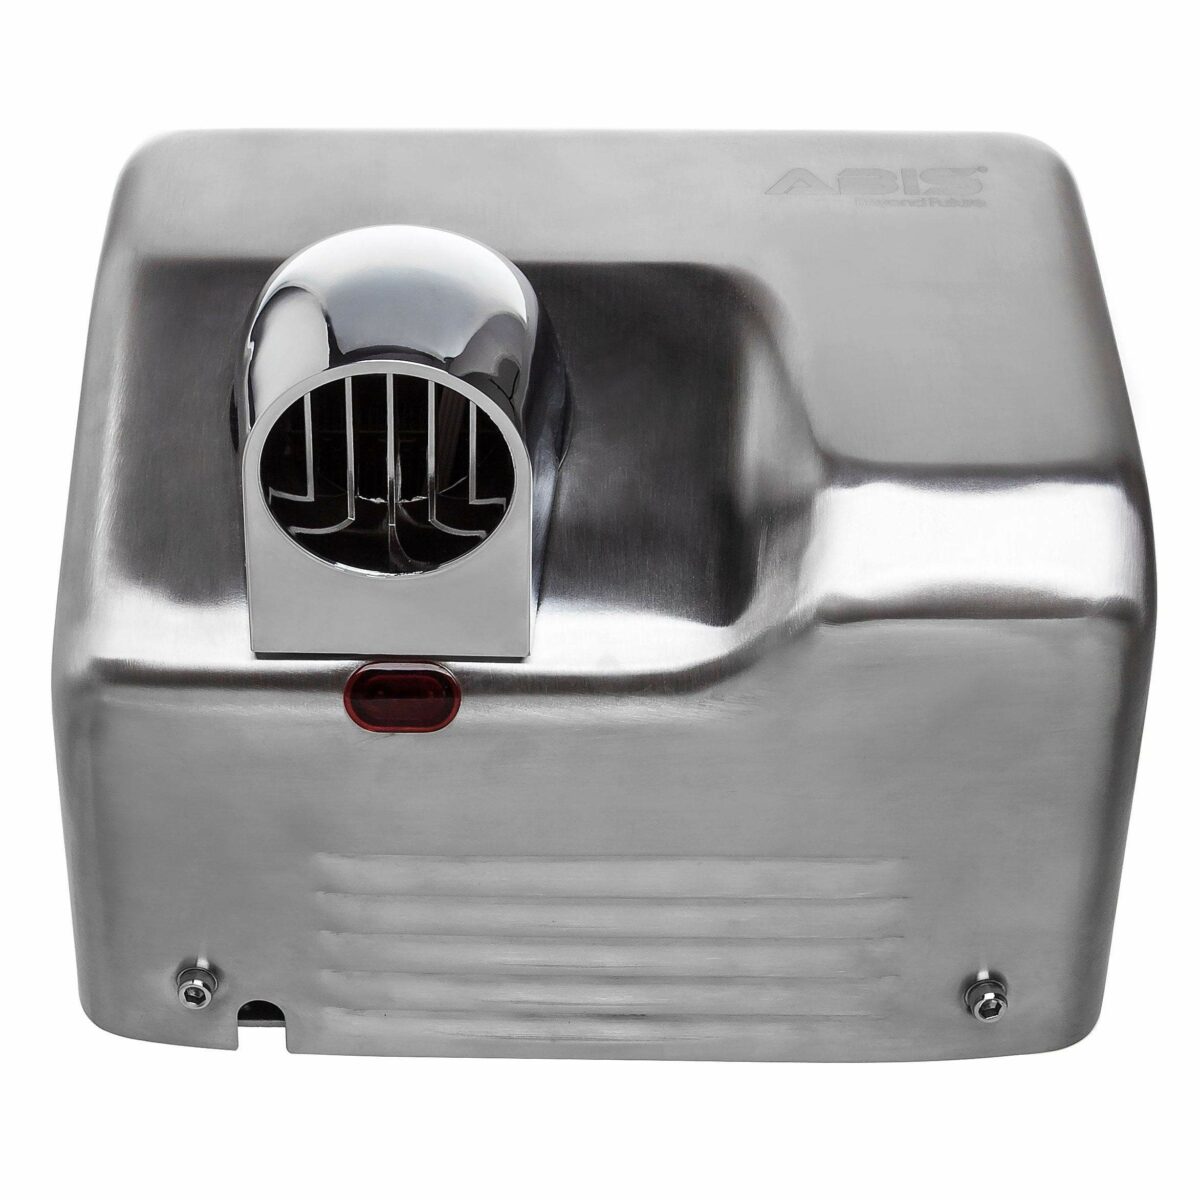 Storm Stainless Steel Commercial Hand Dryer - Chrome - ABIS